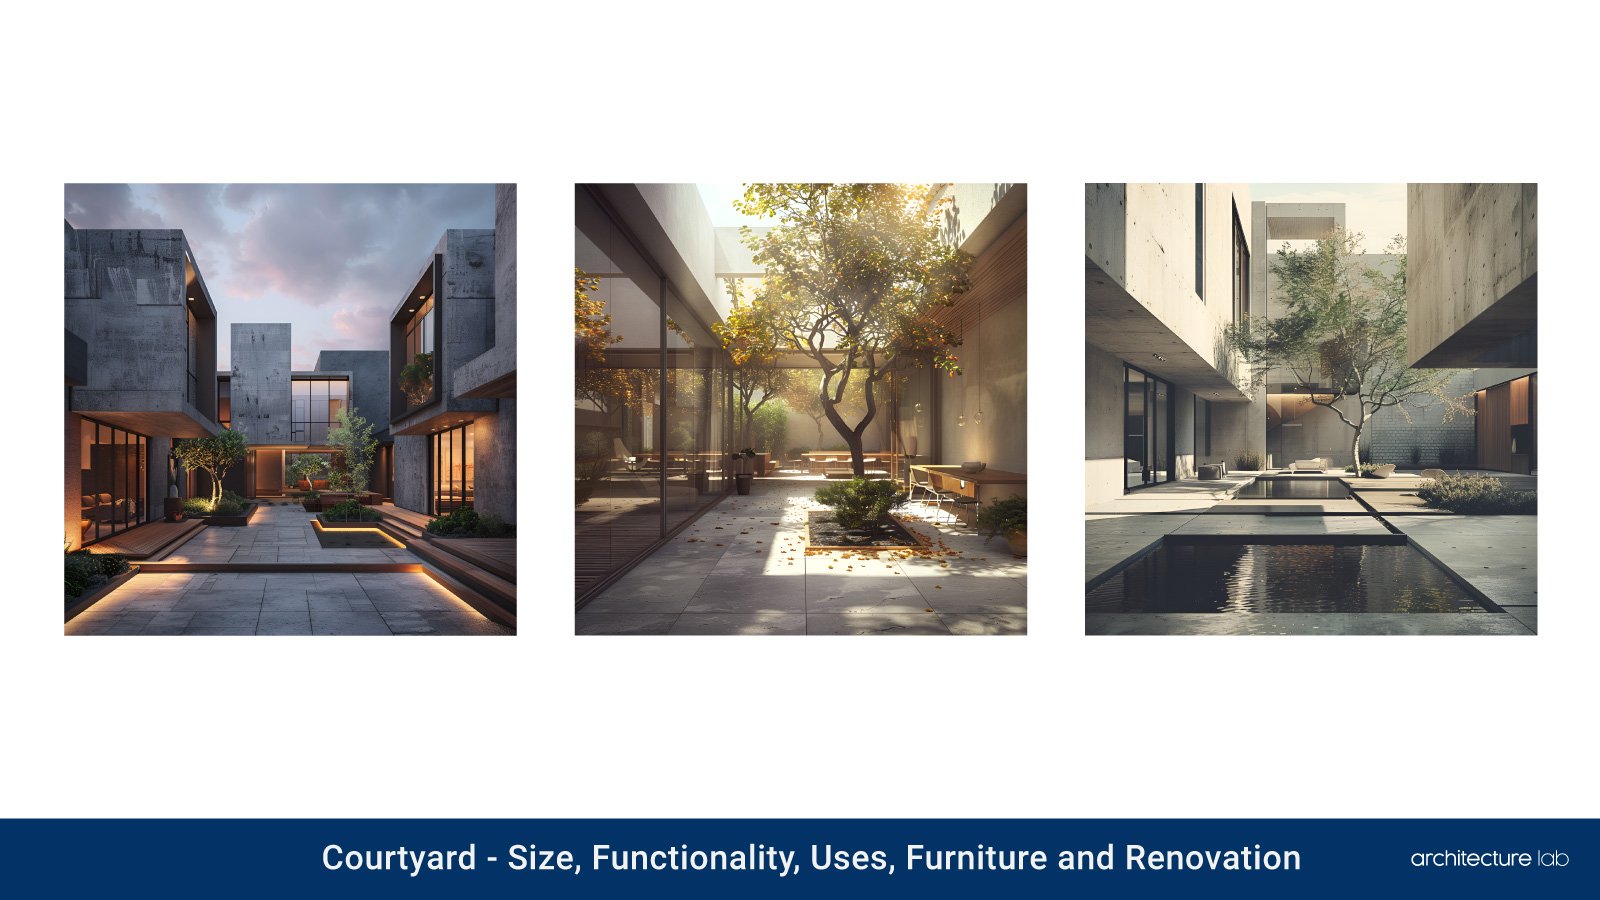 Courtyard: size, functionality, uses, furniture and renovation